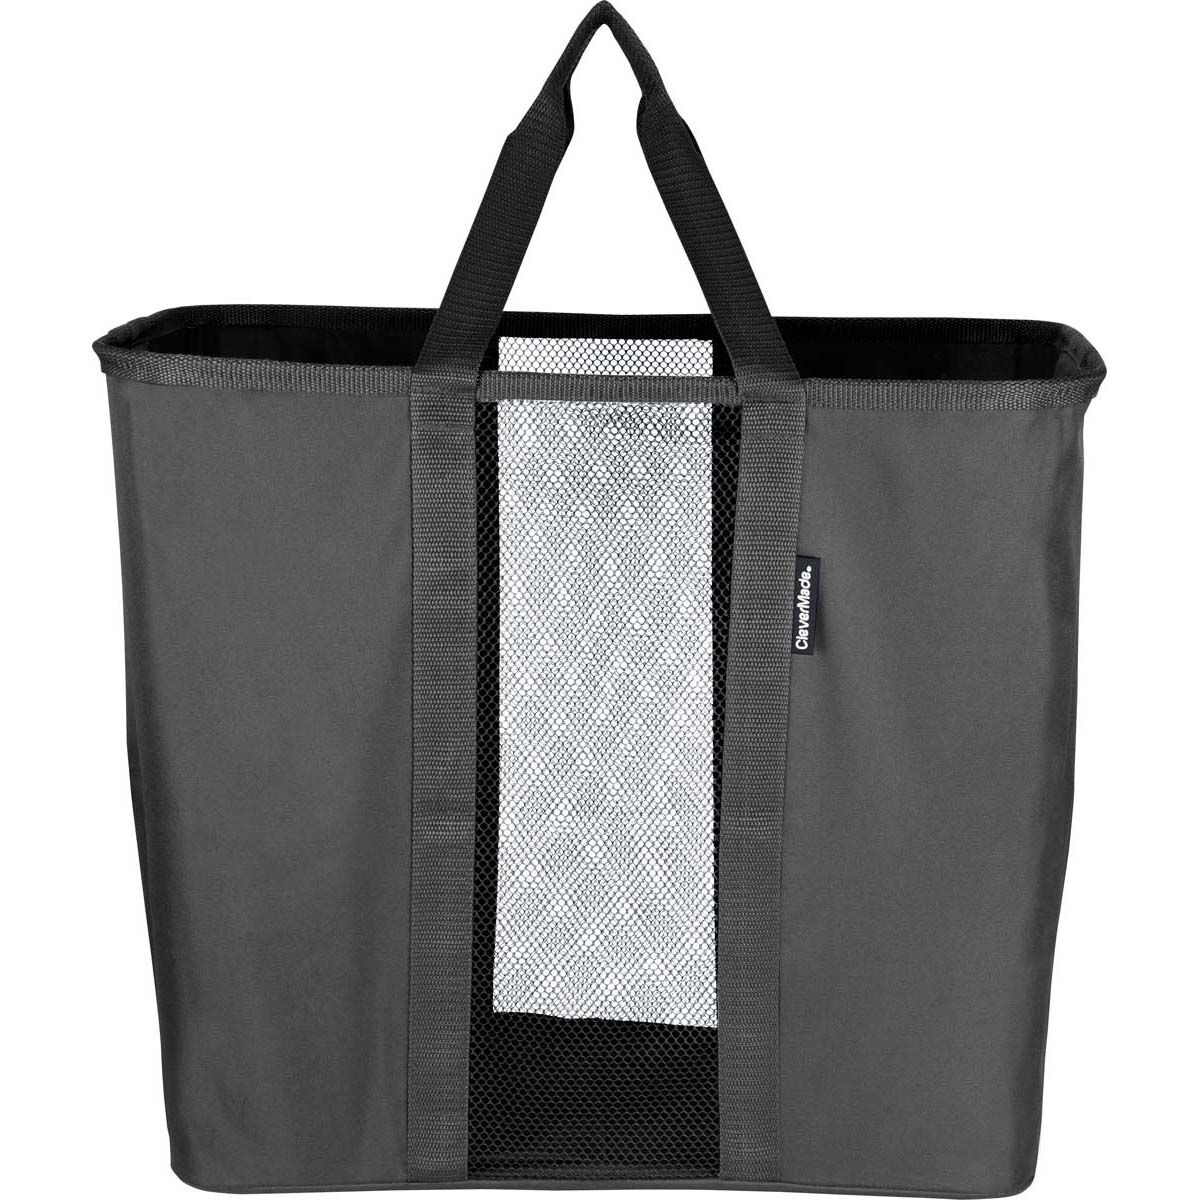 Clevermade Collapsible Laundry Caddy, , bcf_hi-res